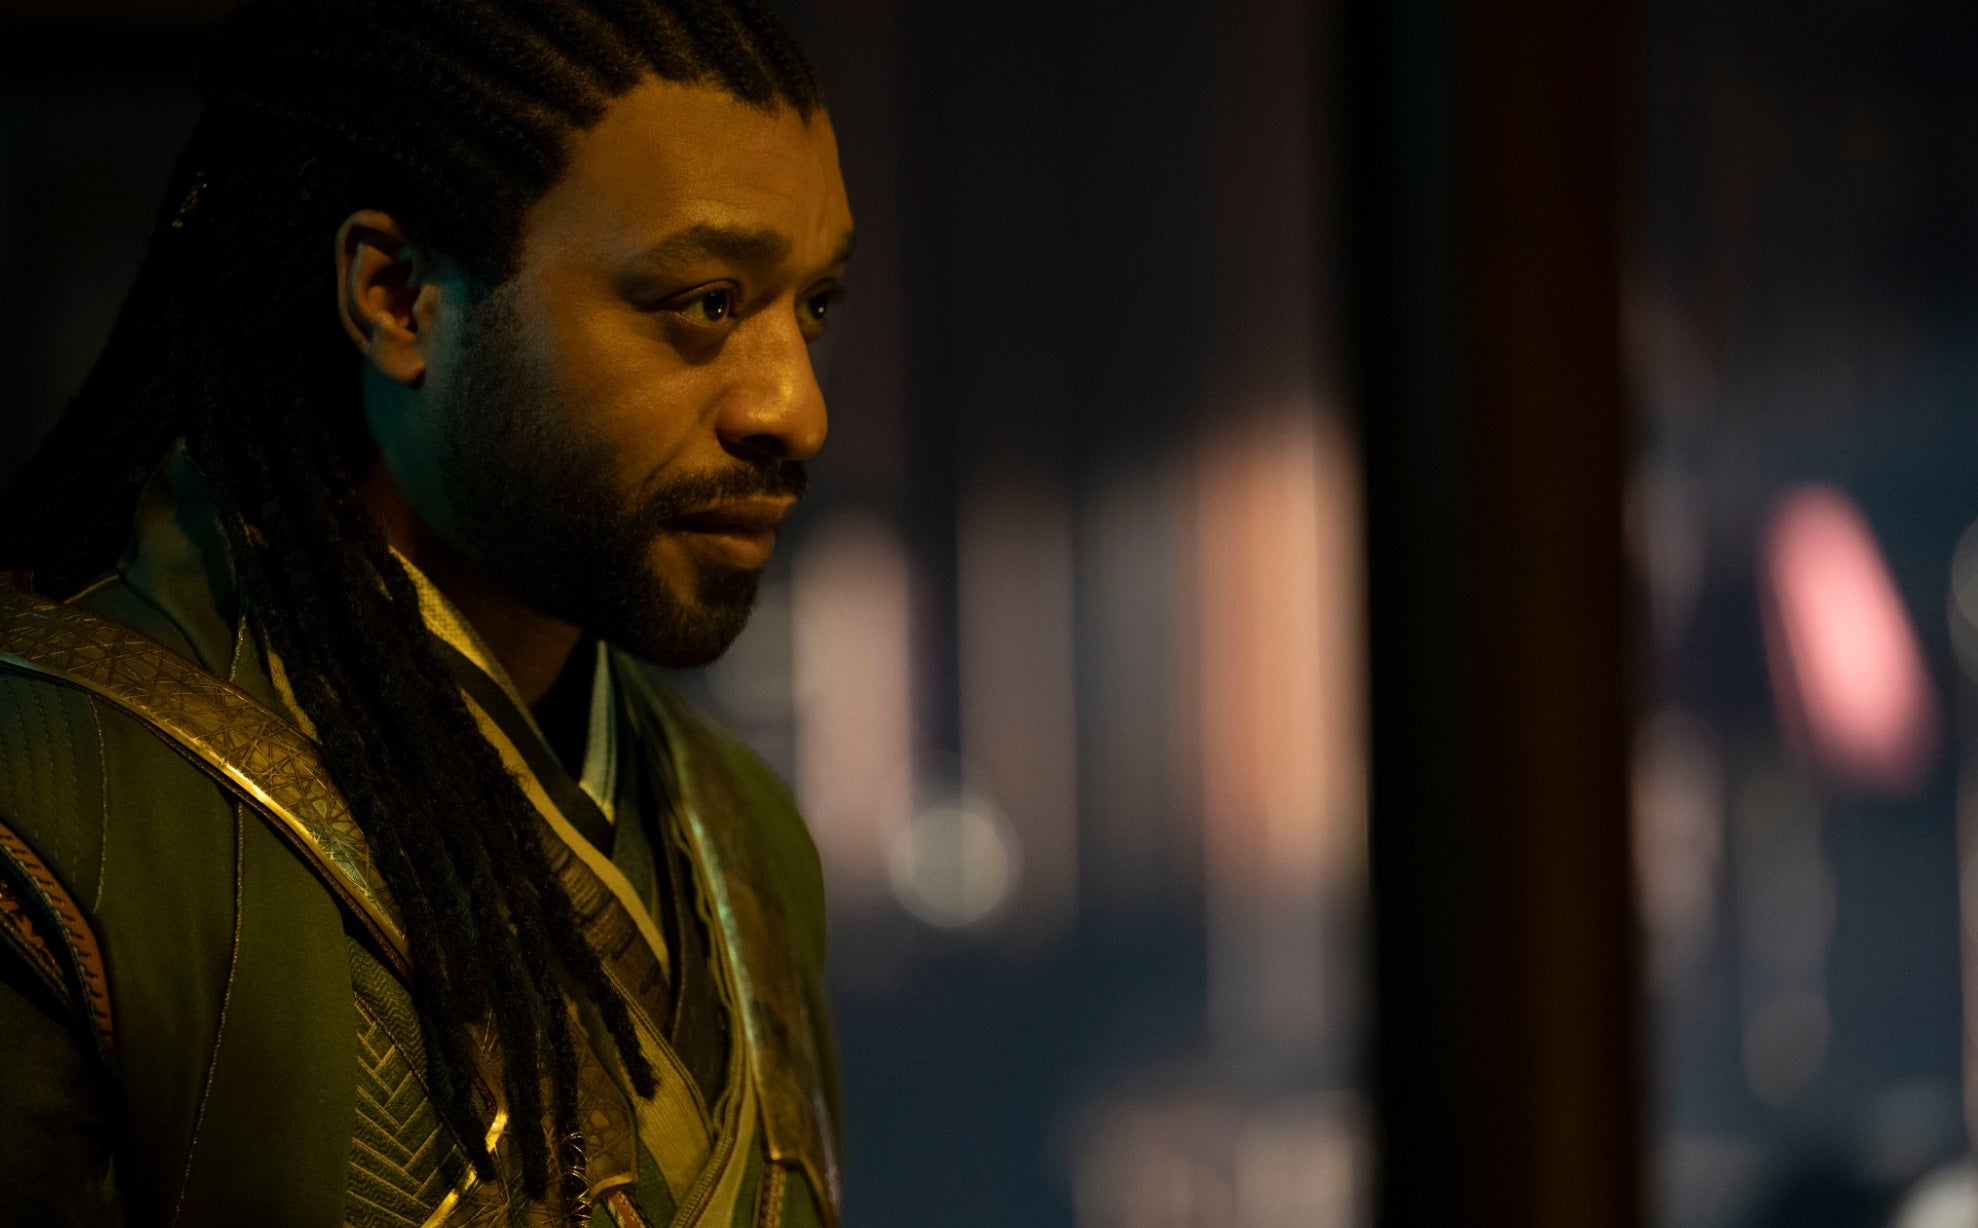 Mordo appears, but not the Mordo from the end of the first film. (Image: Marvel Studios)